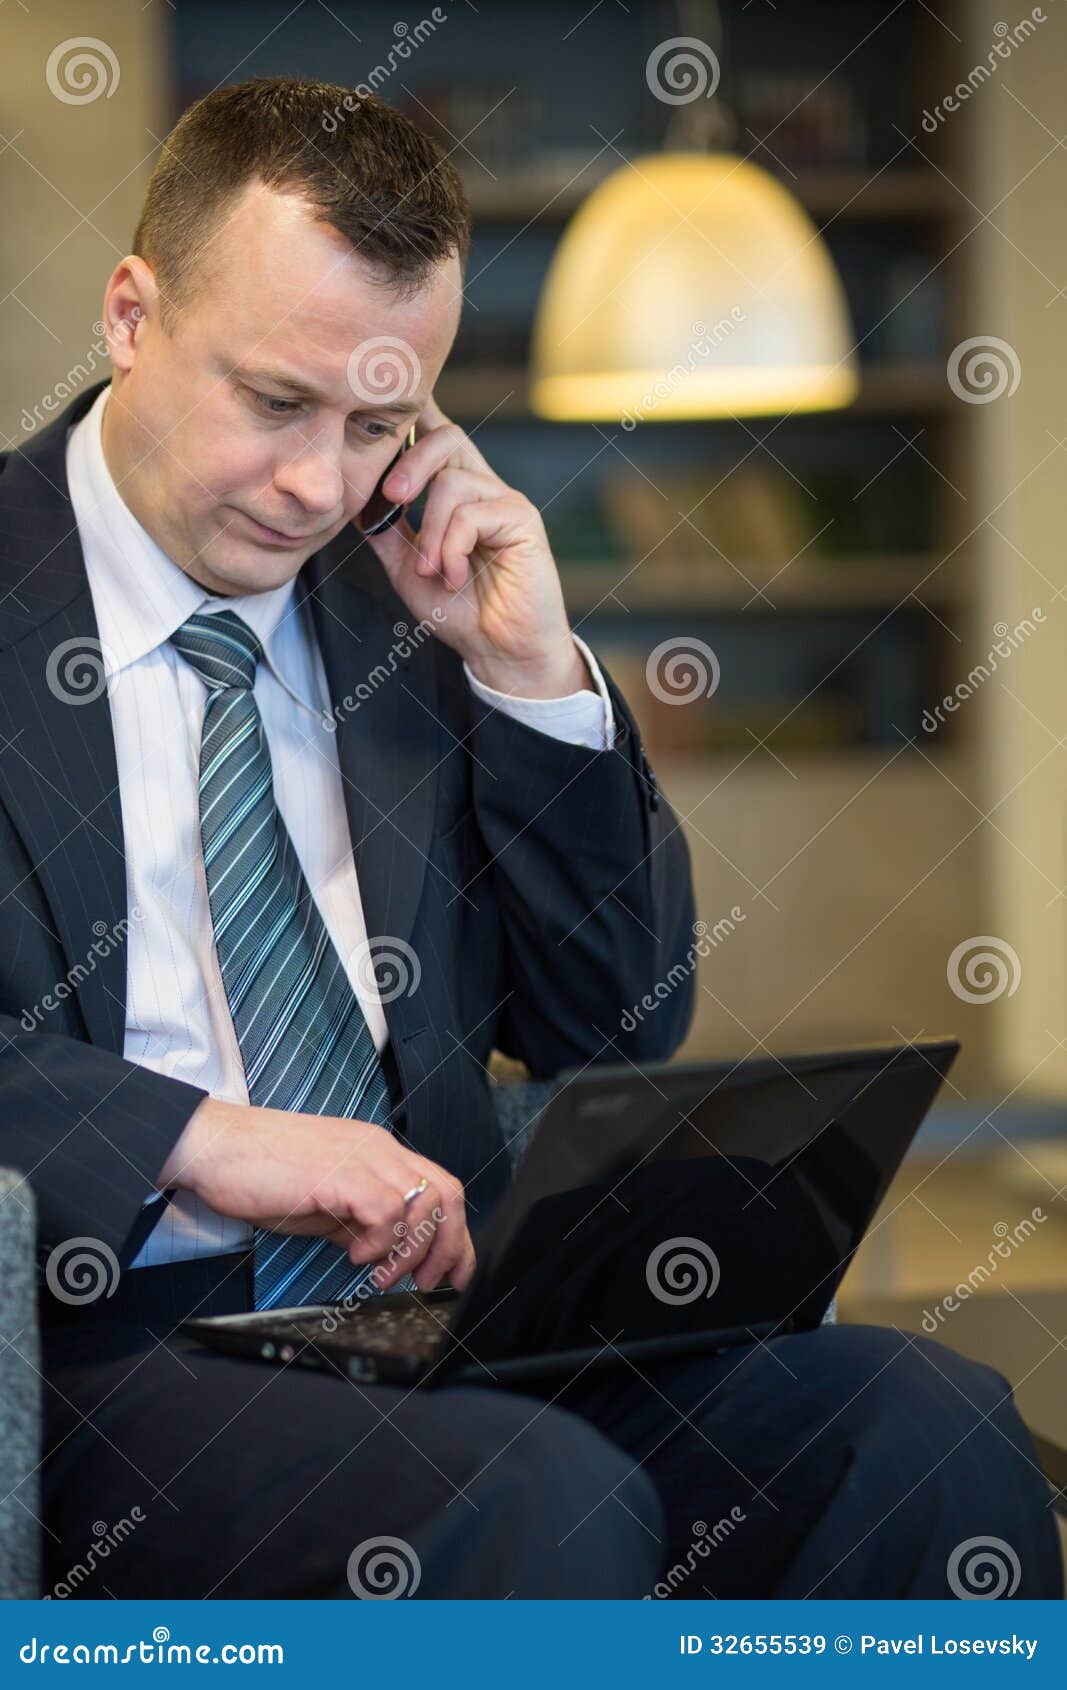 Serious businessman in suit and tie sitting with a laptop. Serious businessman in suit and tie sitting on a chair with a laptop and talking on the phone